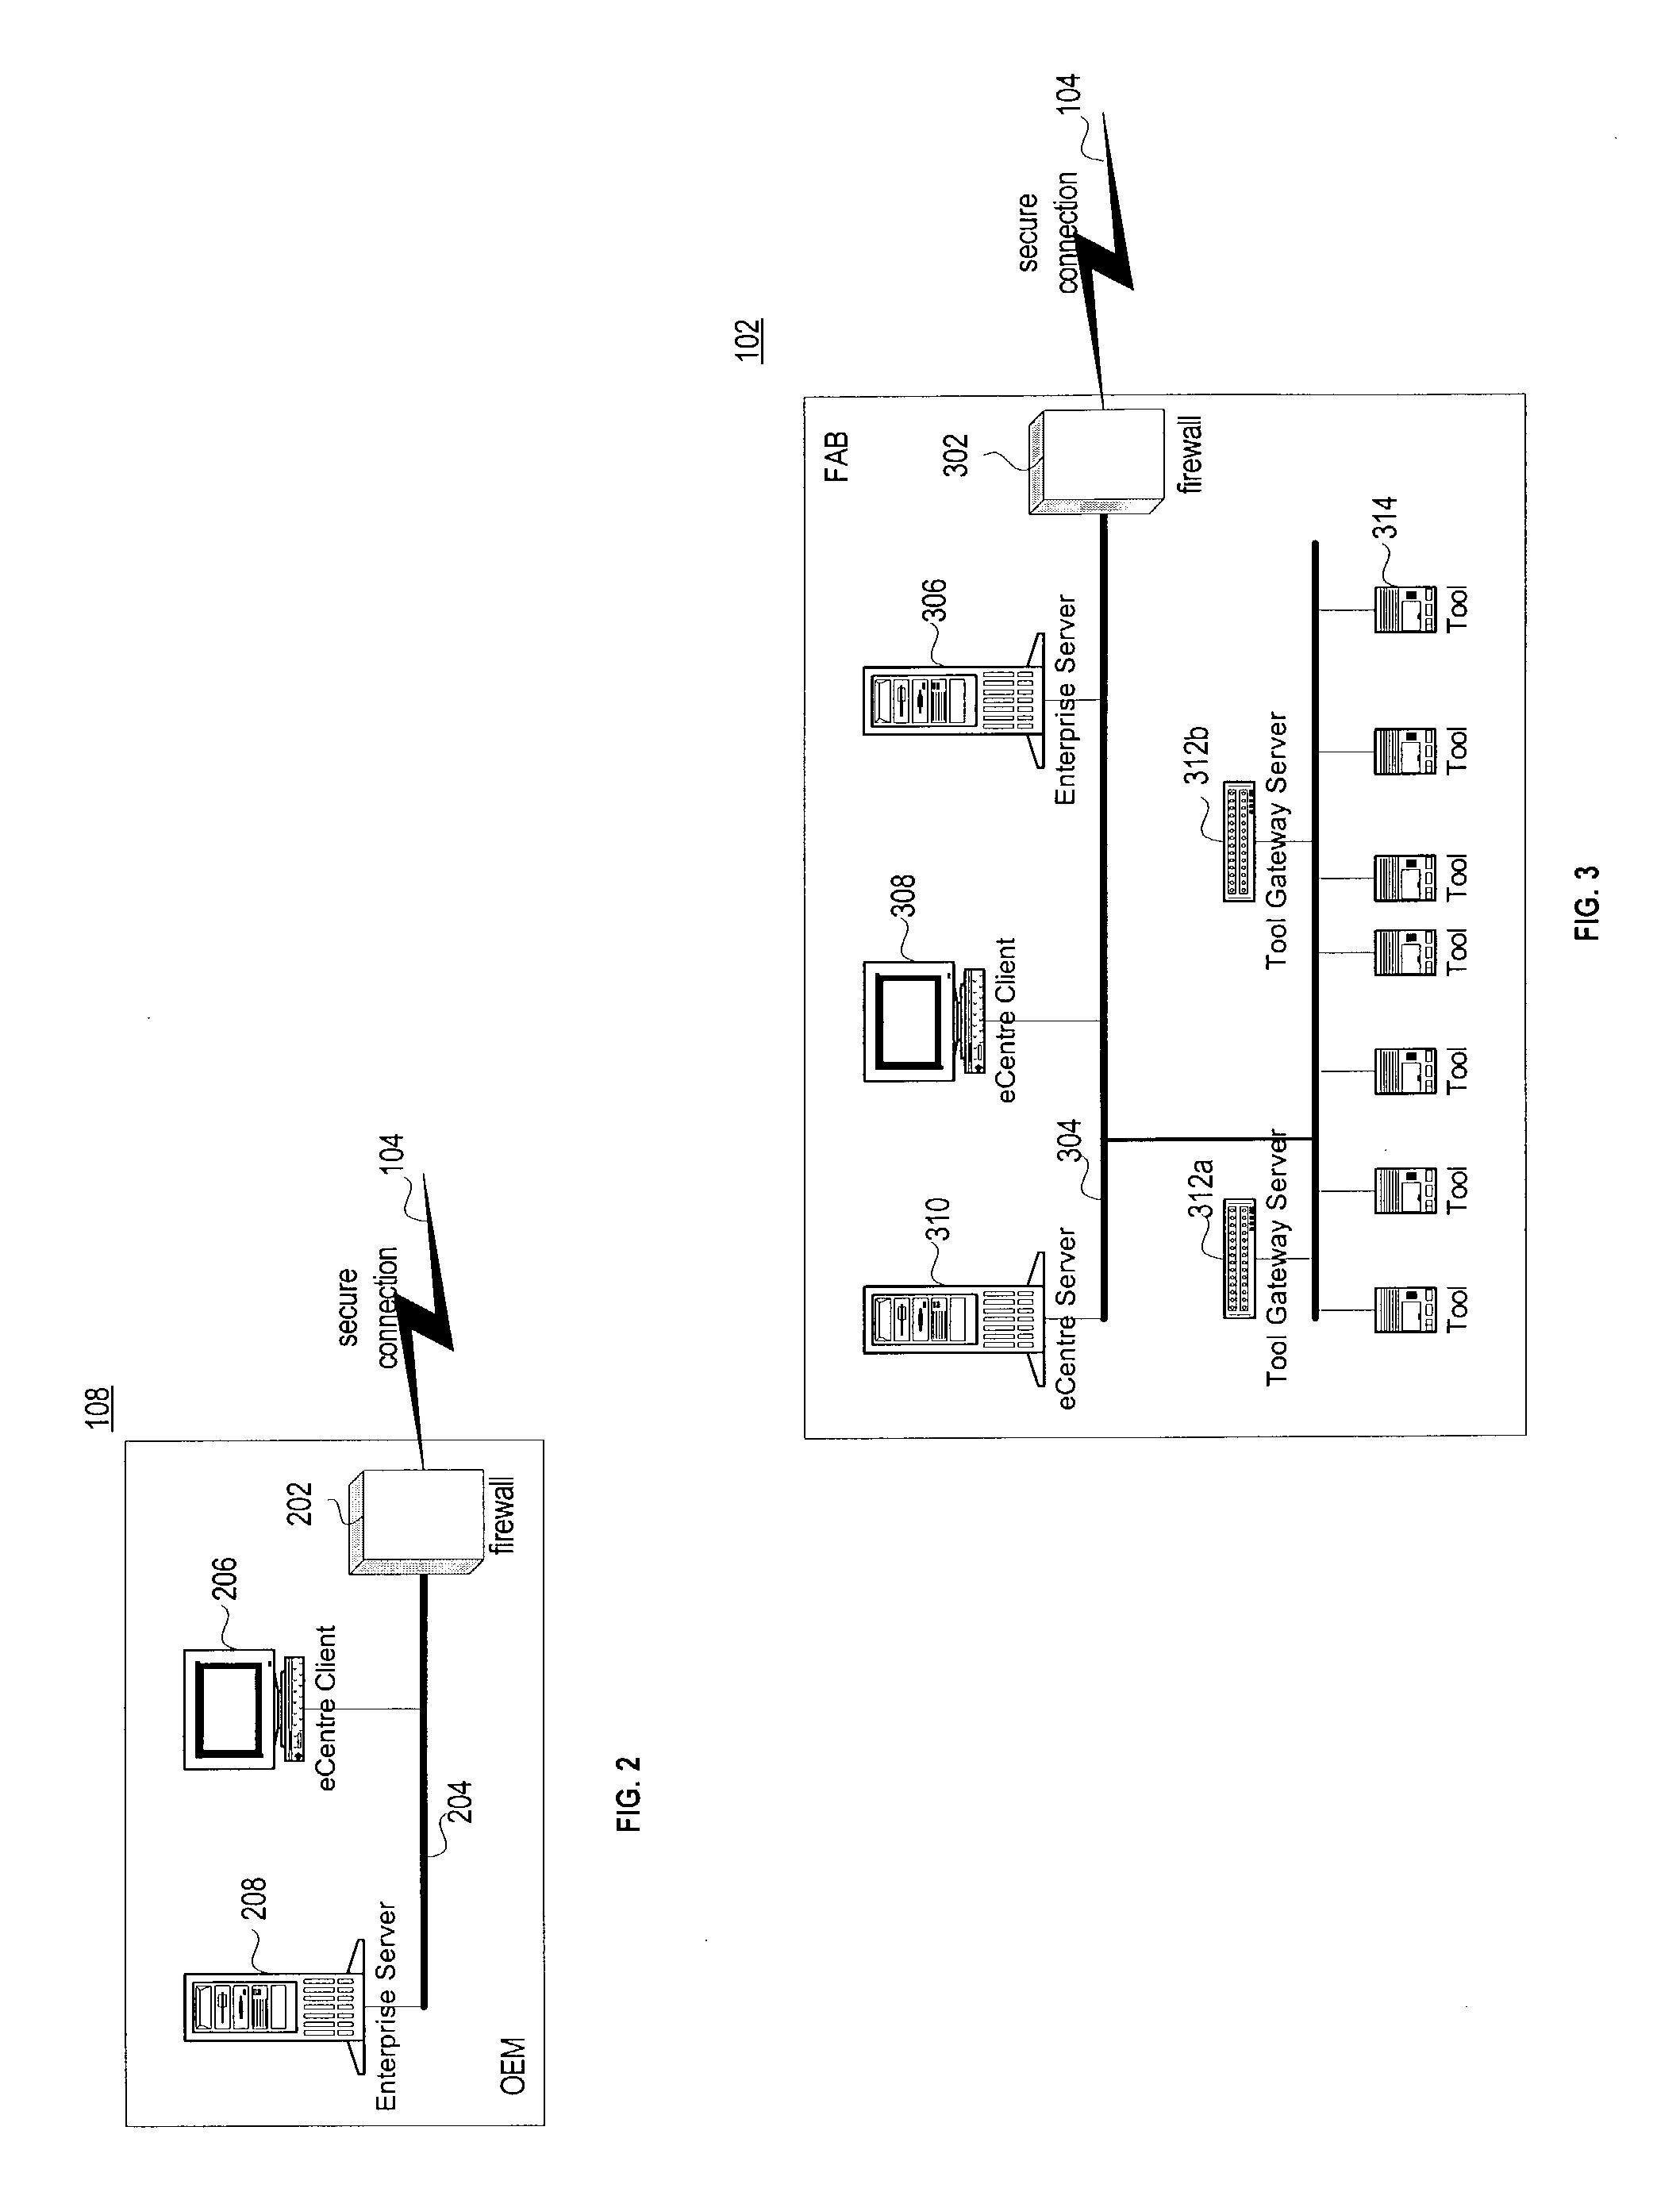 Data brokering system for integrated remote tool access, data collection, and control